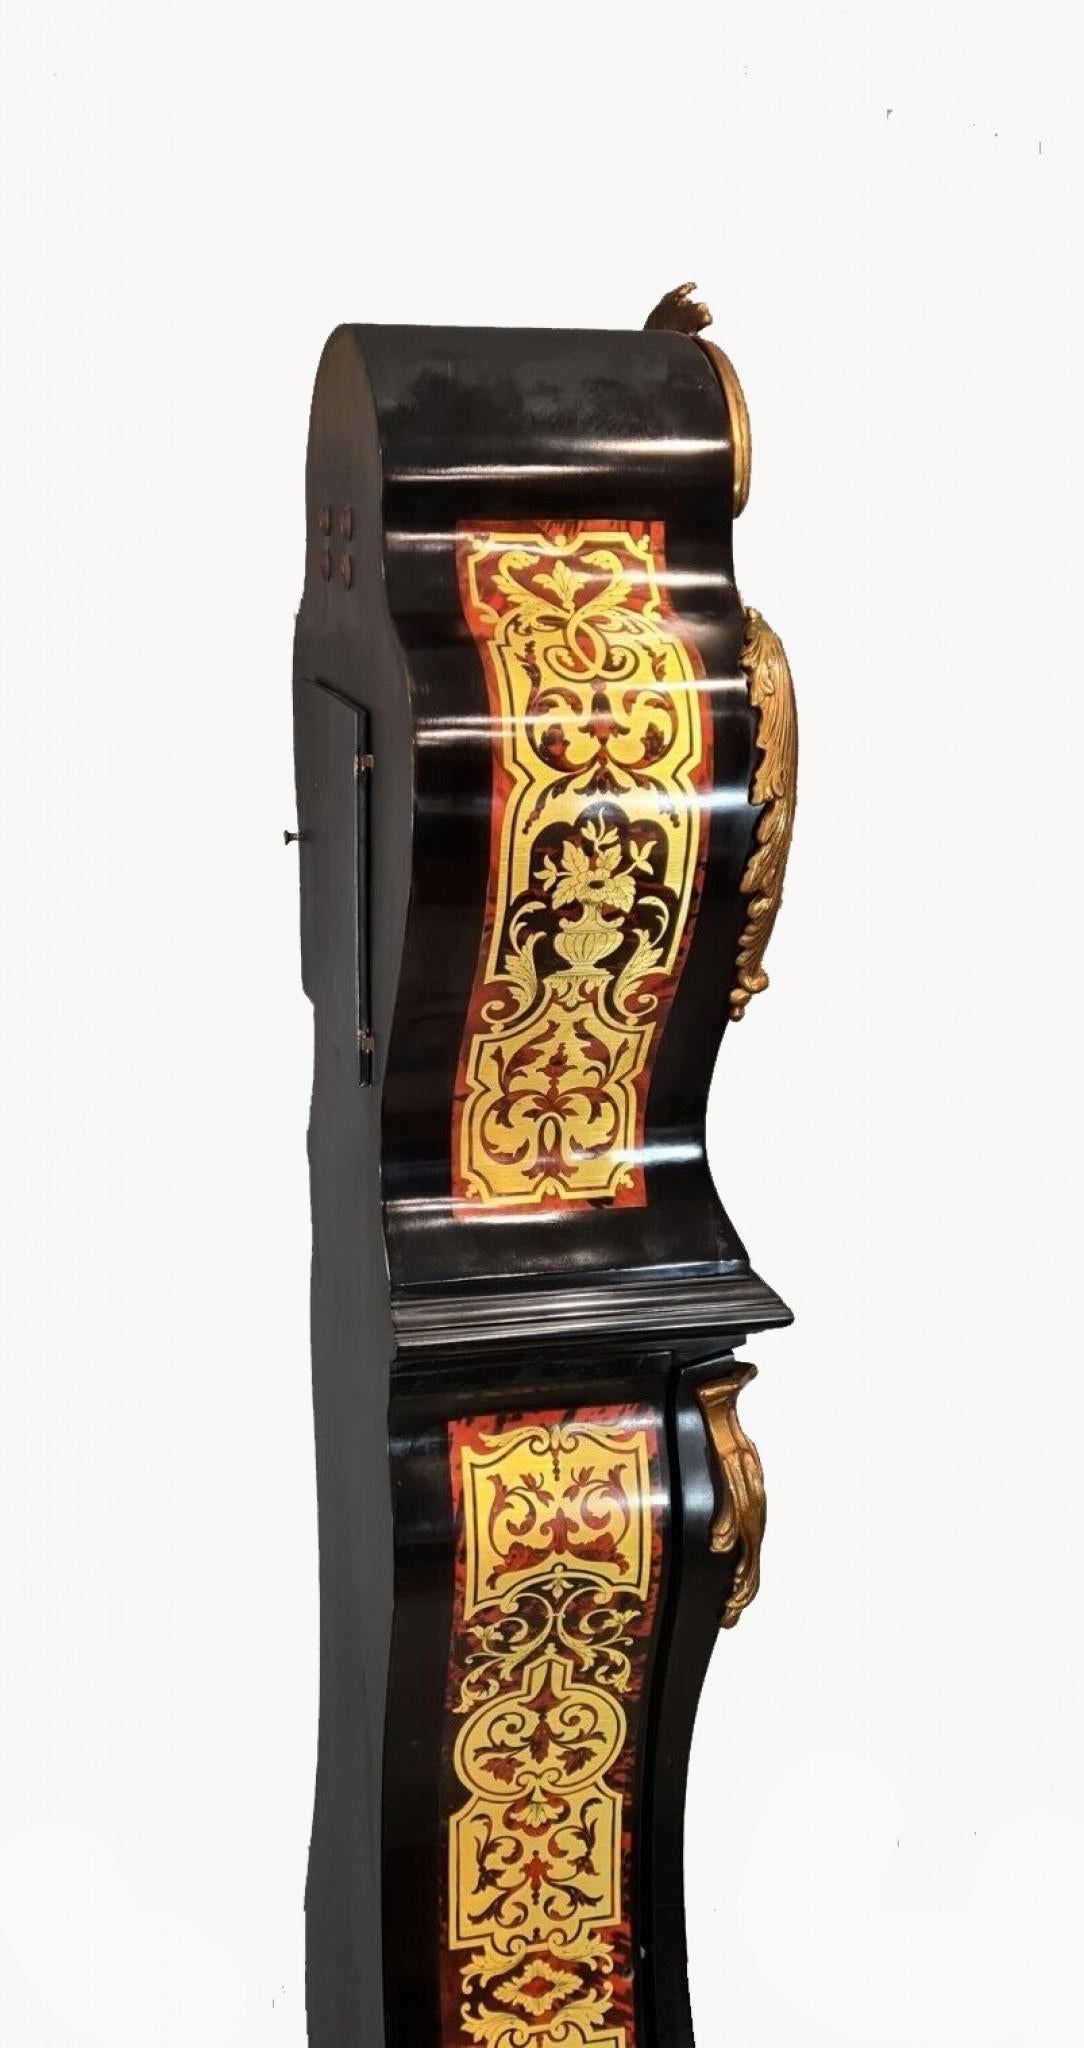 Boulle Clock Longcase Grandfather French Inlay Westminster Chimes 1